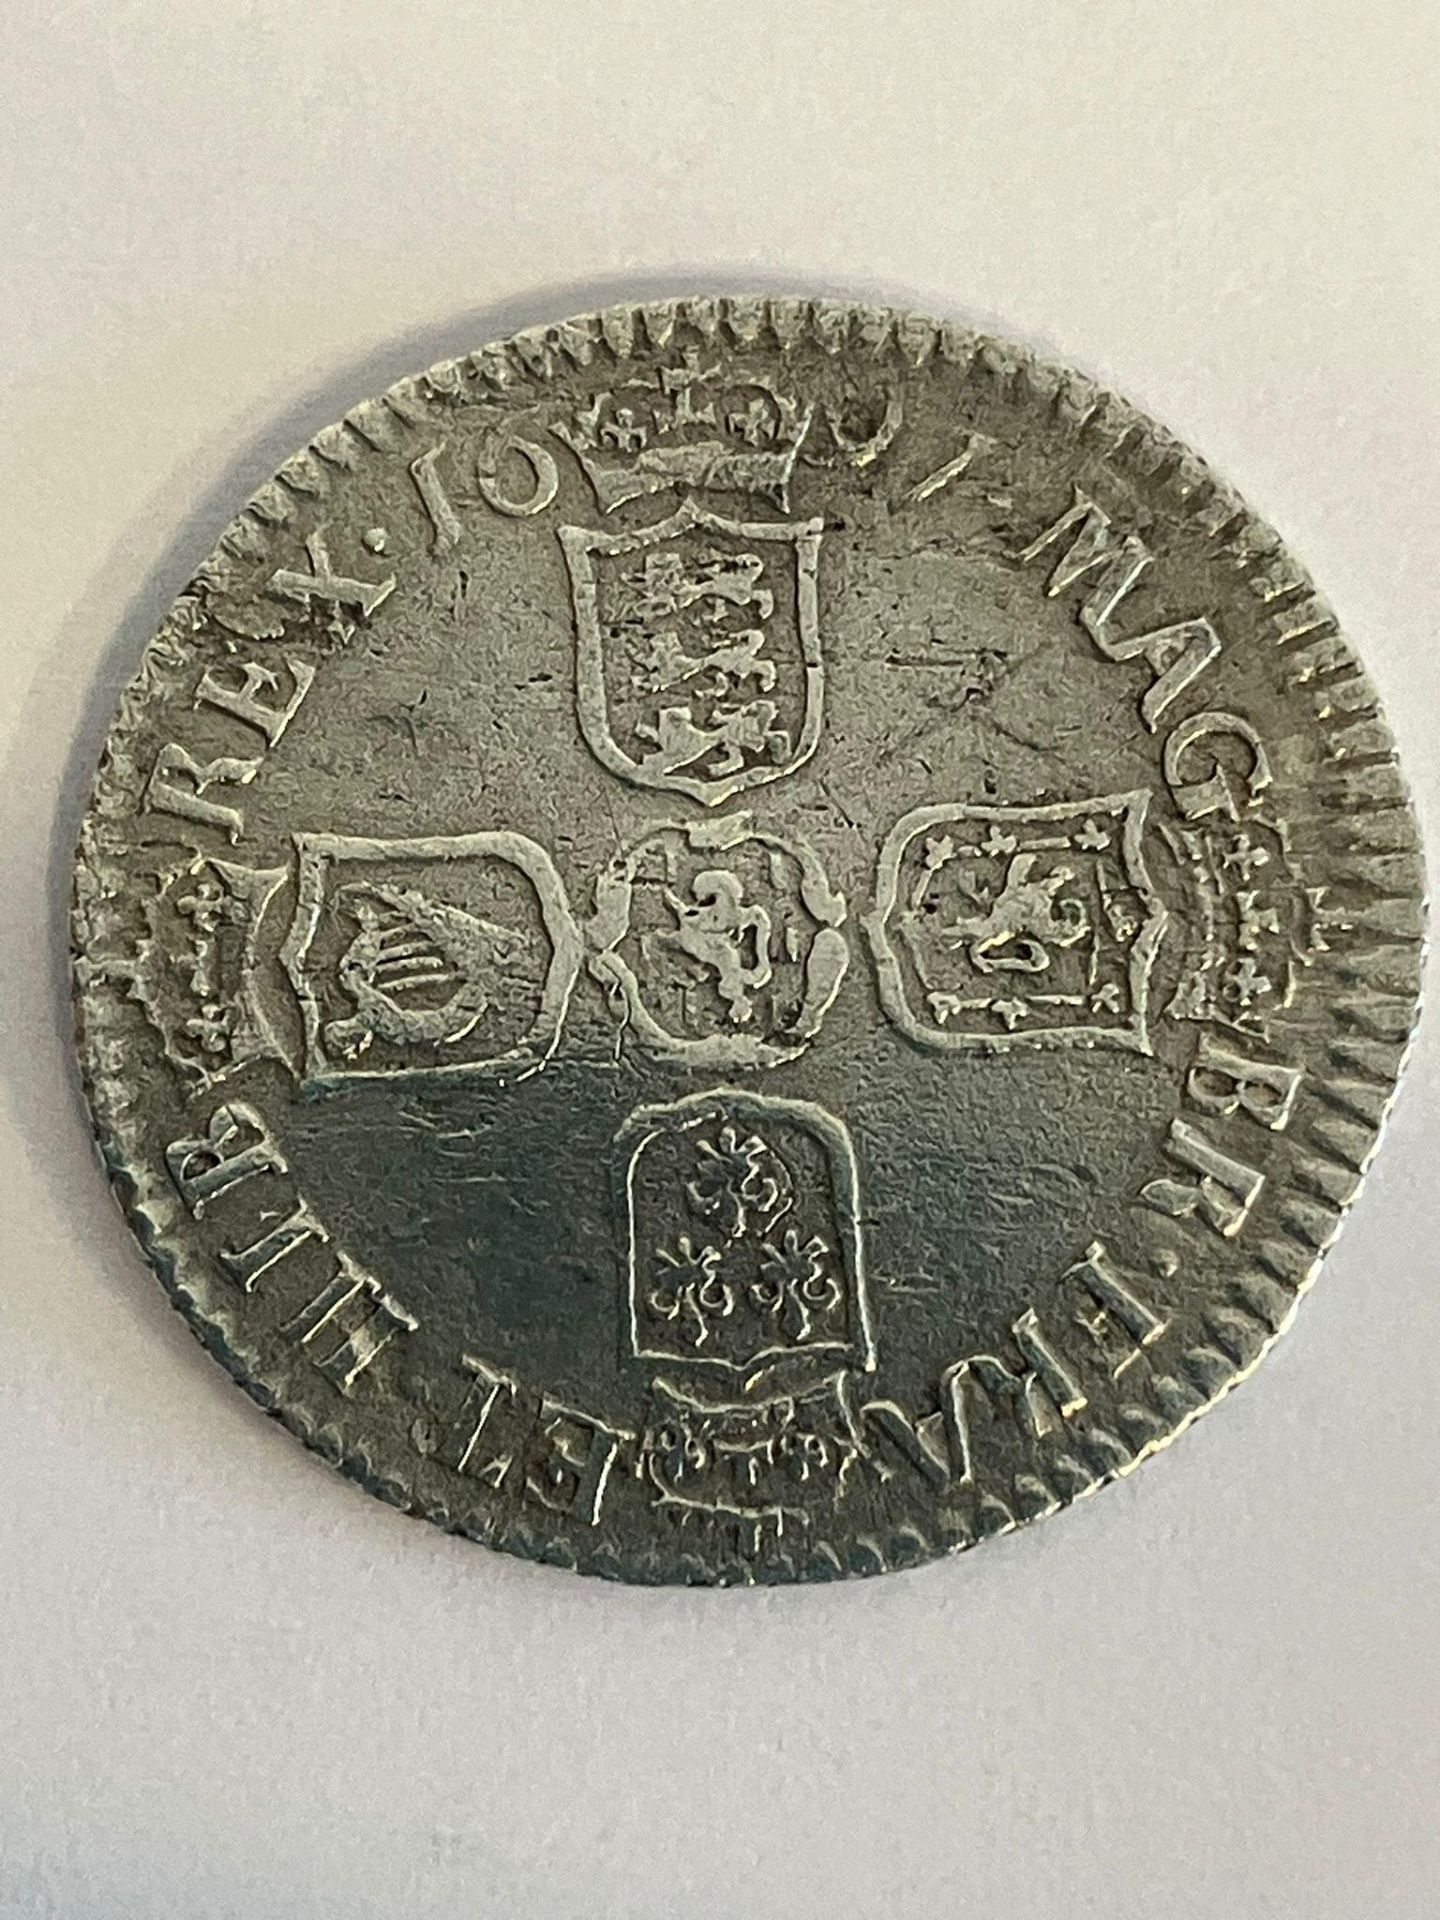 1697 WILLIAM III (William of Orange) SILVER SIXPENCE. Very fine/ extra fine condition. Please see